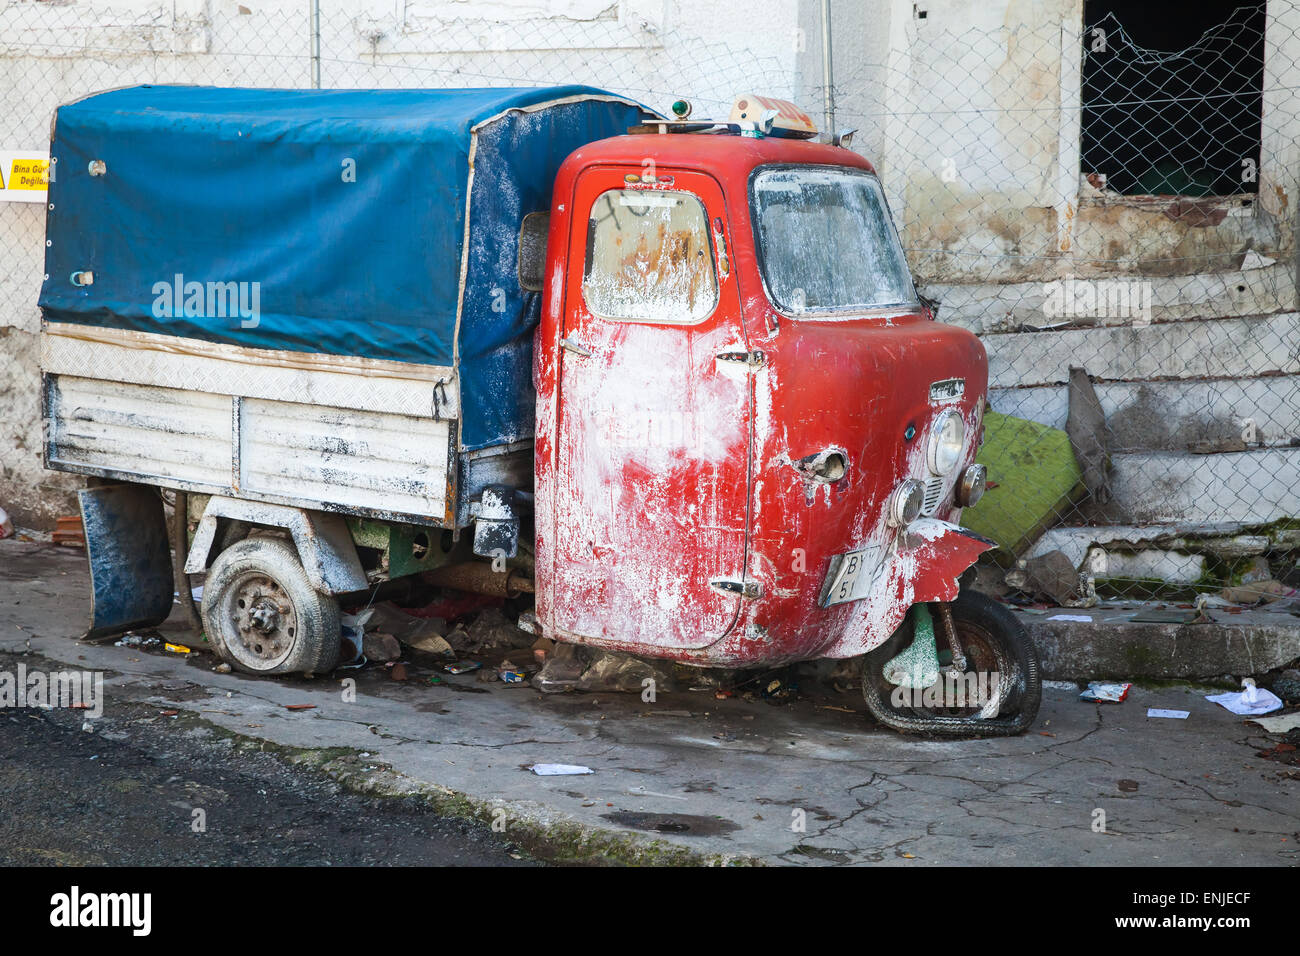 Izmir, Turkey - February 7, 2015: Old red and blue tricycle cargo bike stands on the street of Izmir. This is traditional small Stock Photo